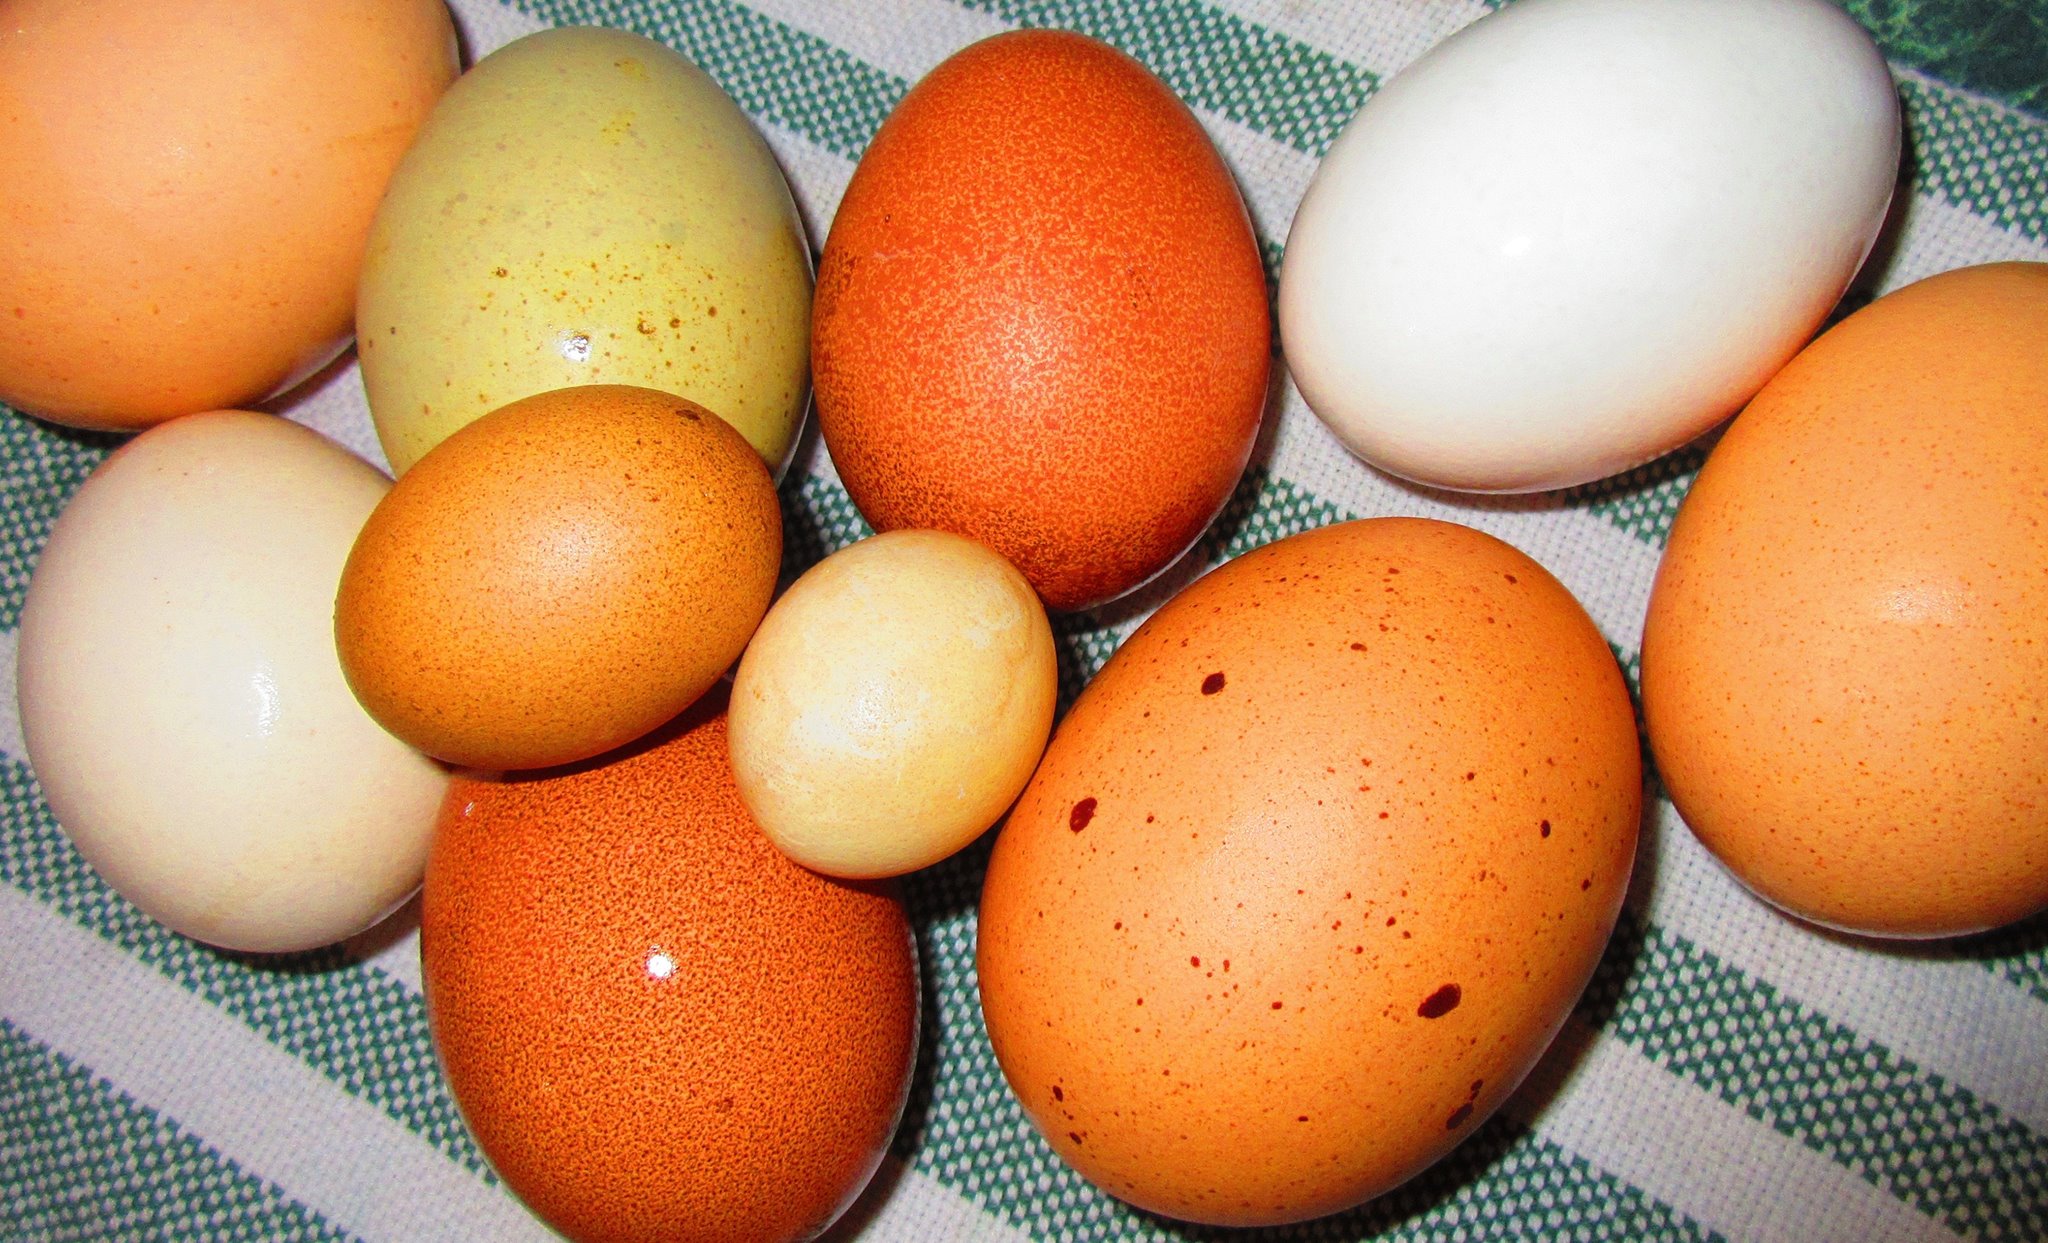 Eggs laid by backyard chickens. Photo by Tina Nettles.